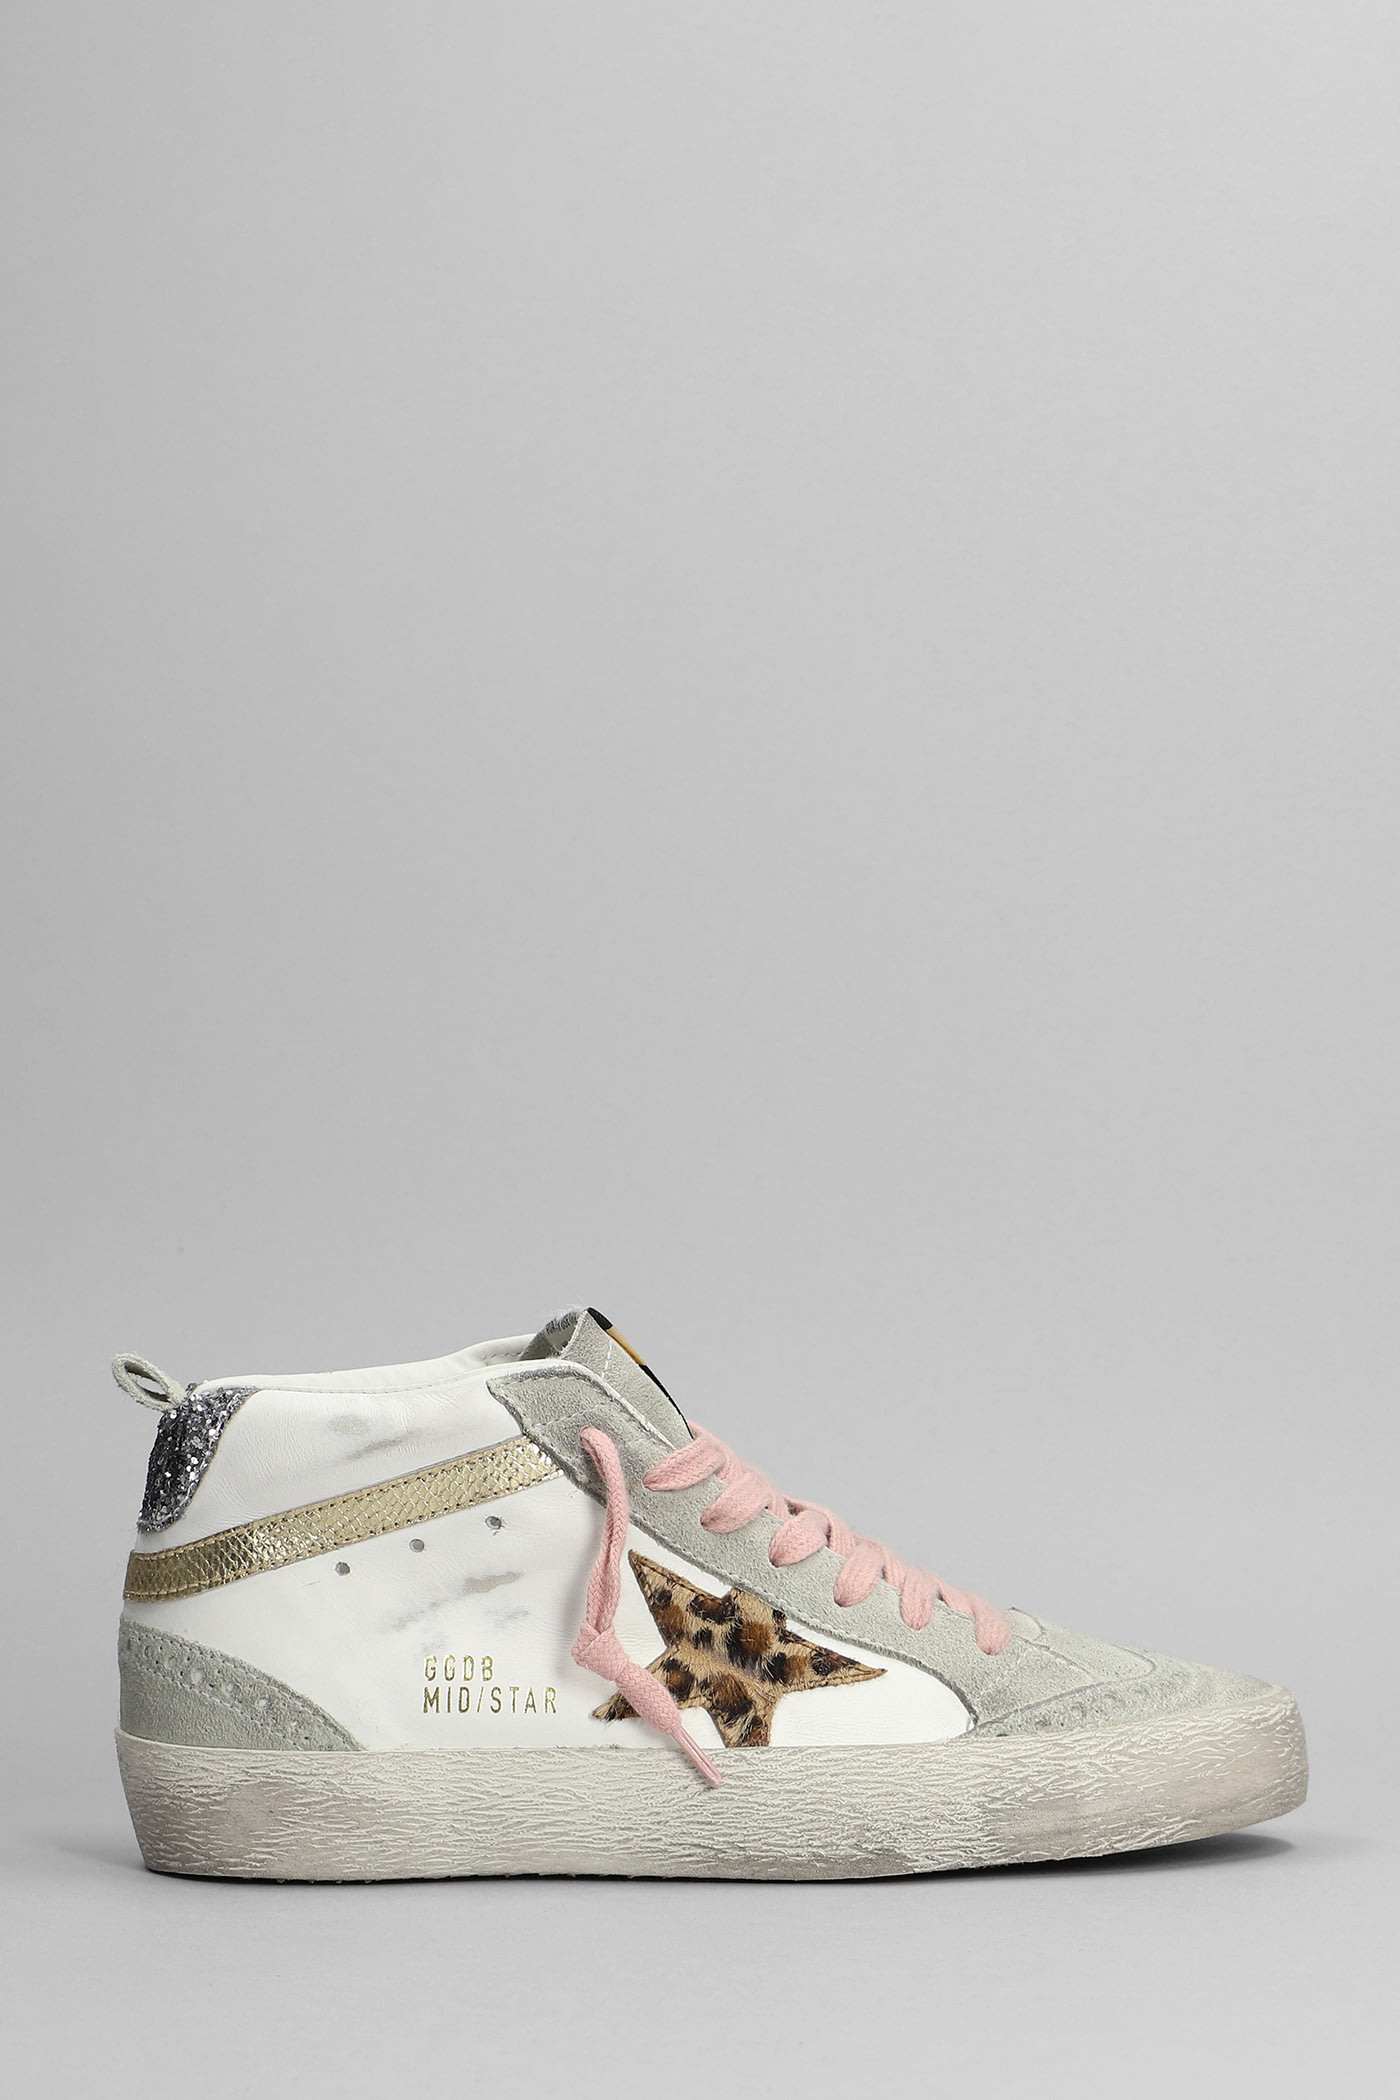 Golden Goose Mid Star Sneakers In White Suede And Leather